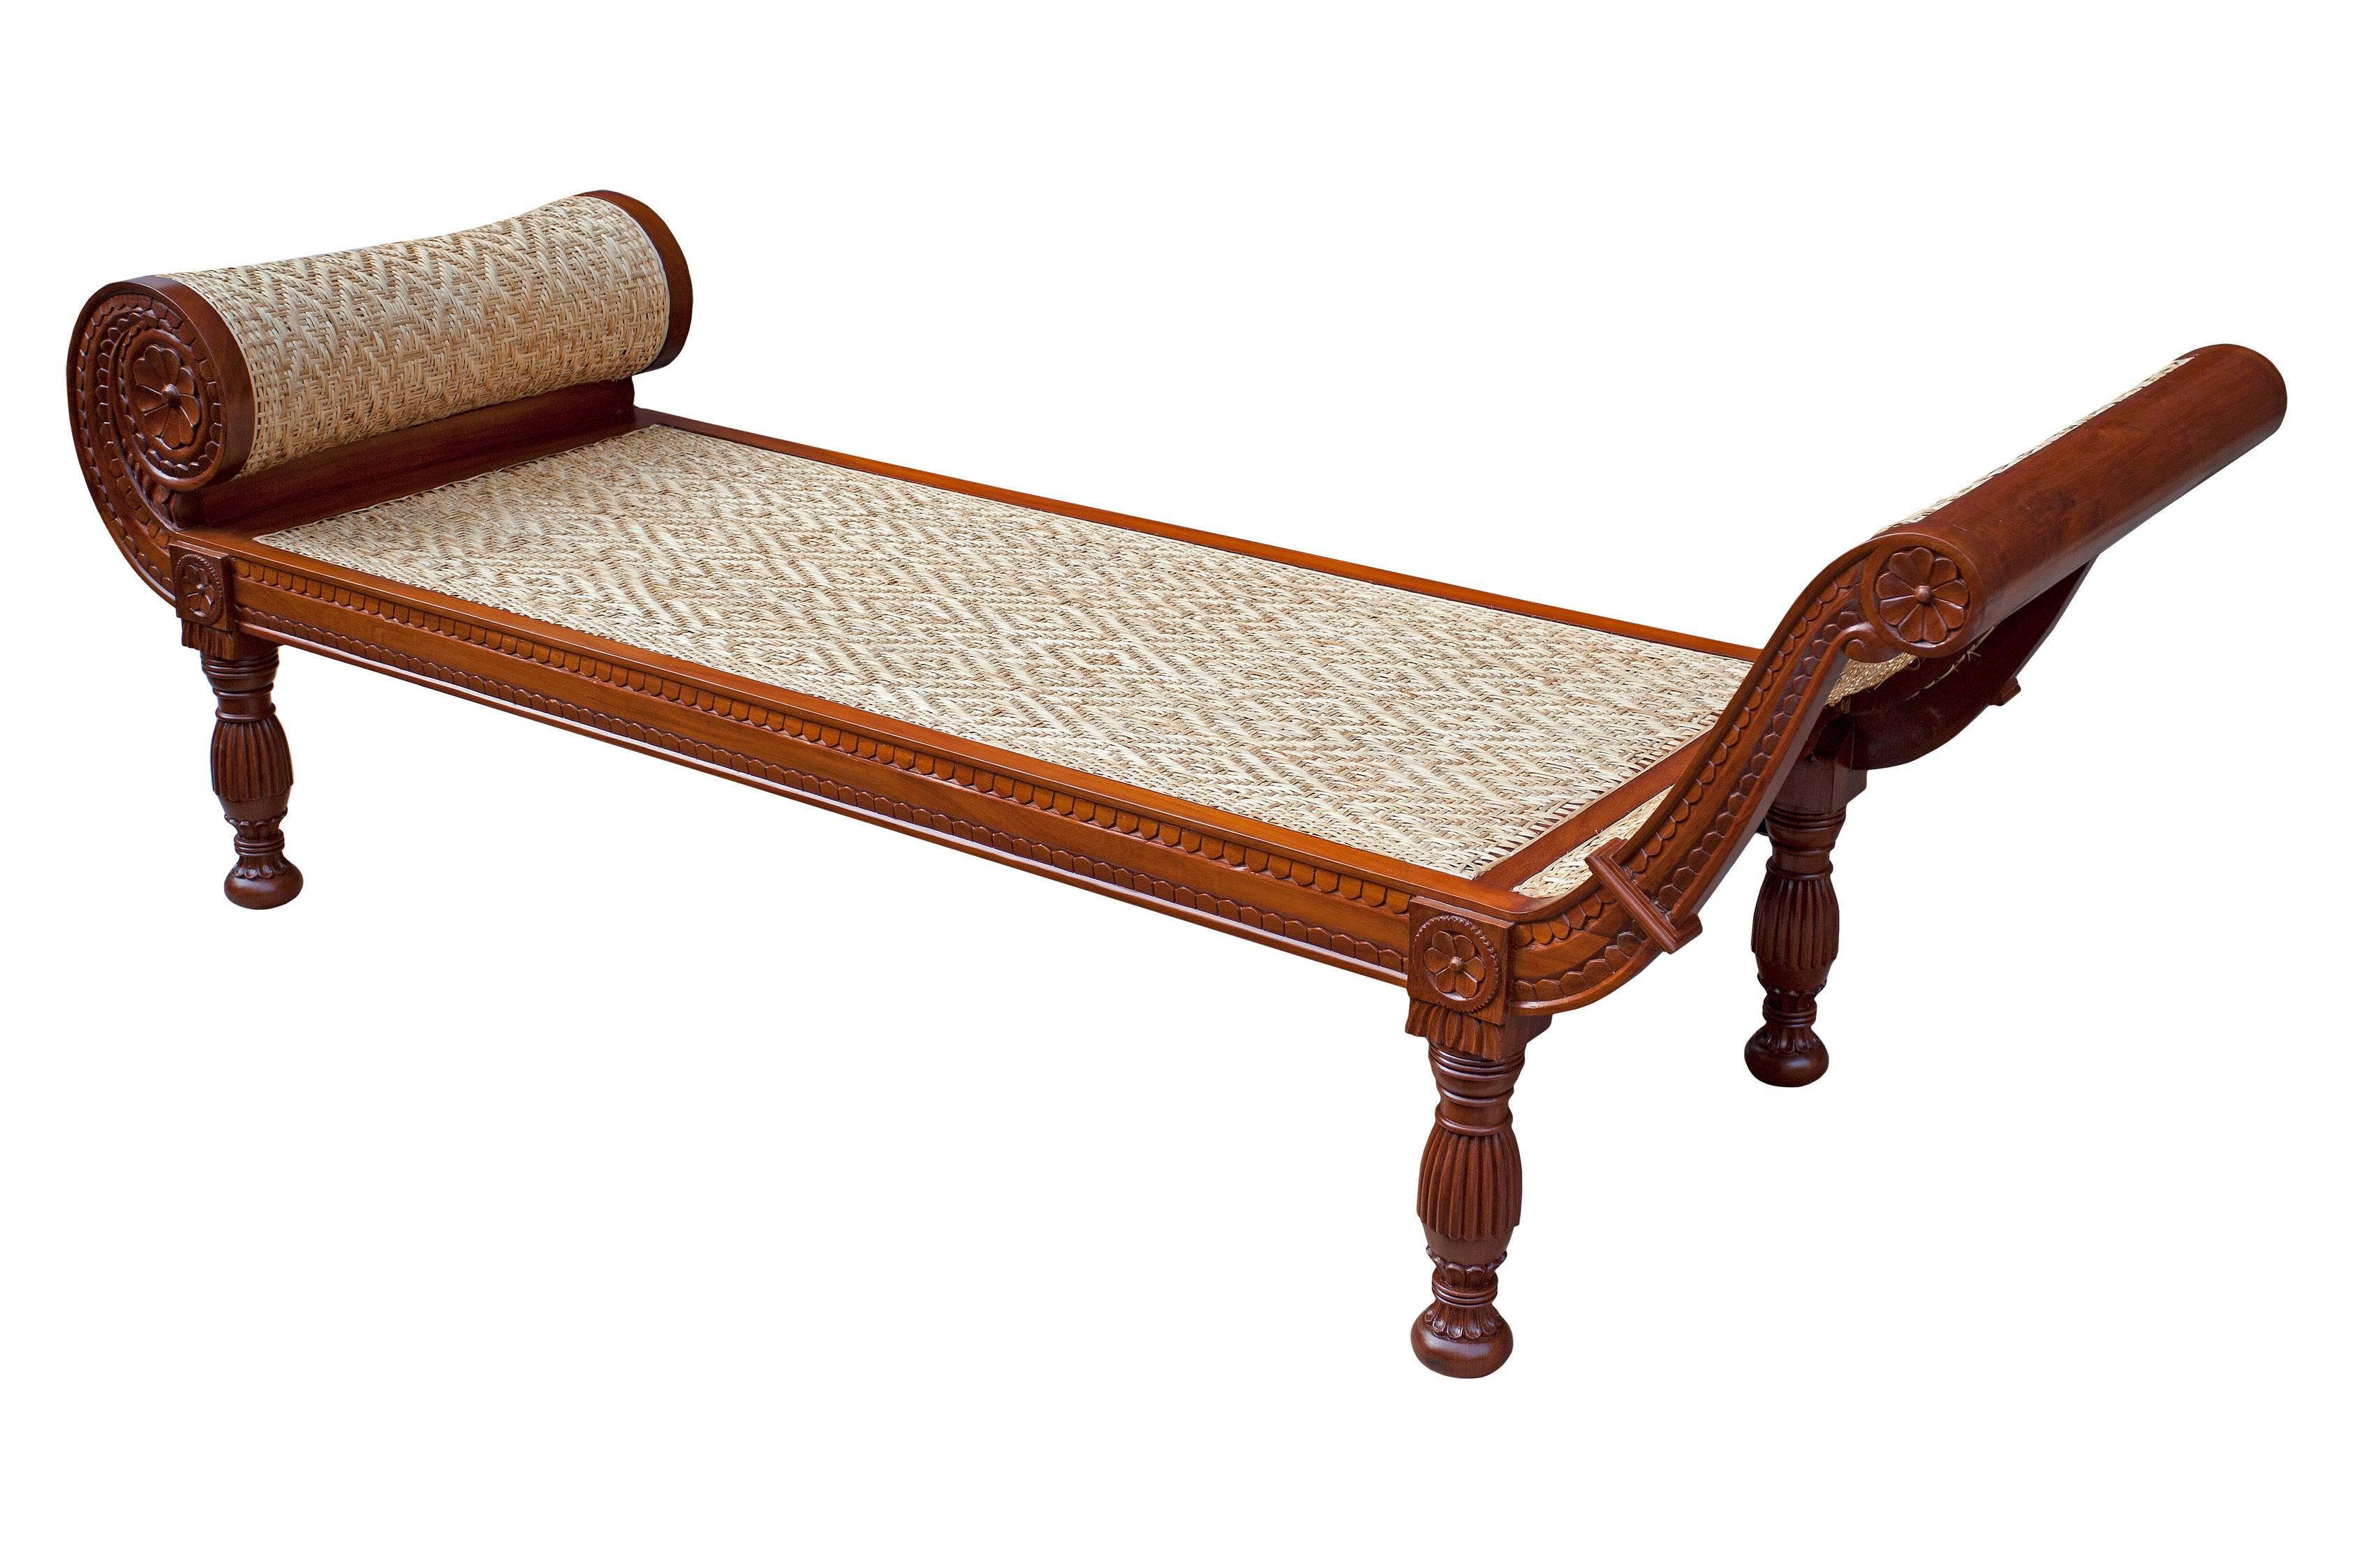 British Colonial Colonial British Mahogany and Caned Daybed with Fine Carving